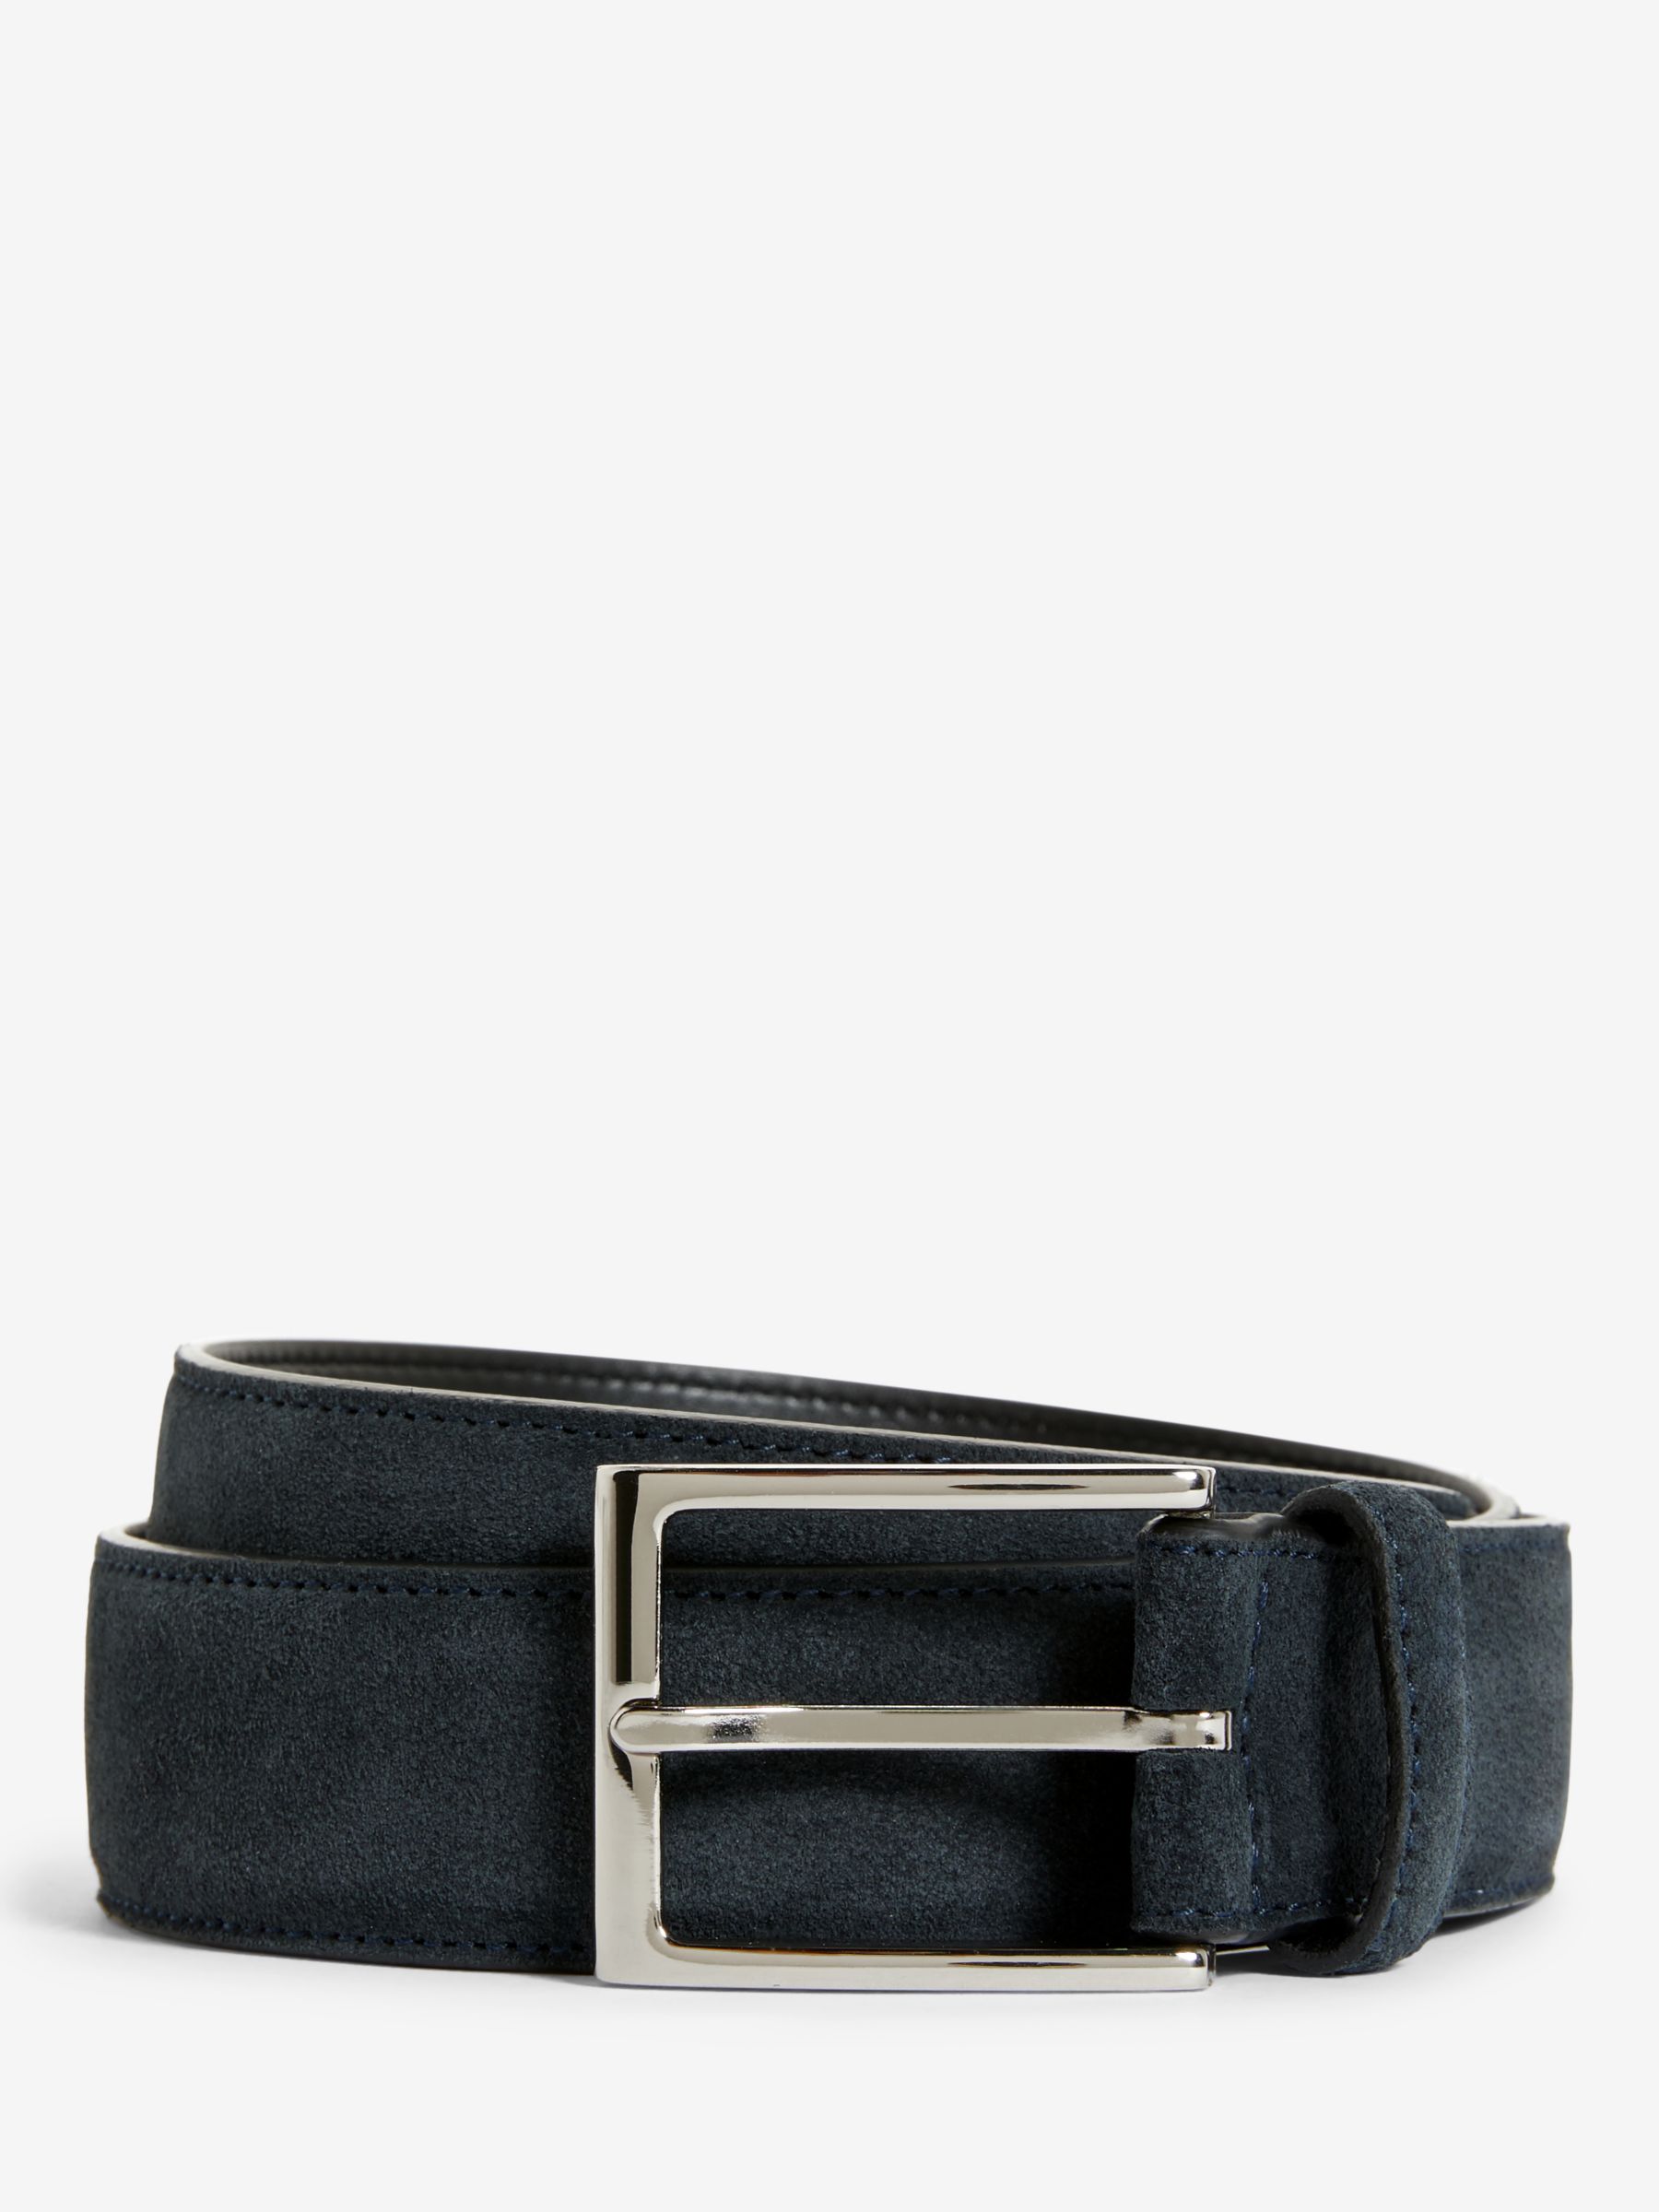 John Lewis Made in Italy 35mm Suede Belt, Navy, S